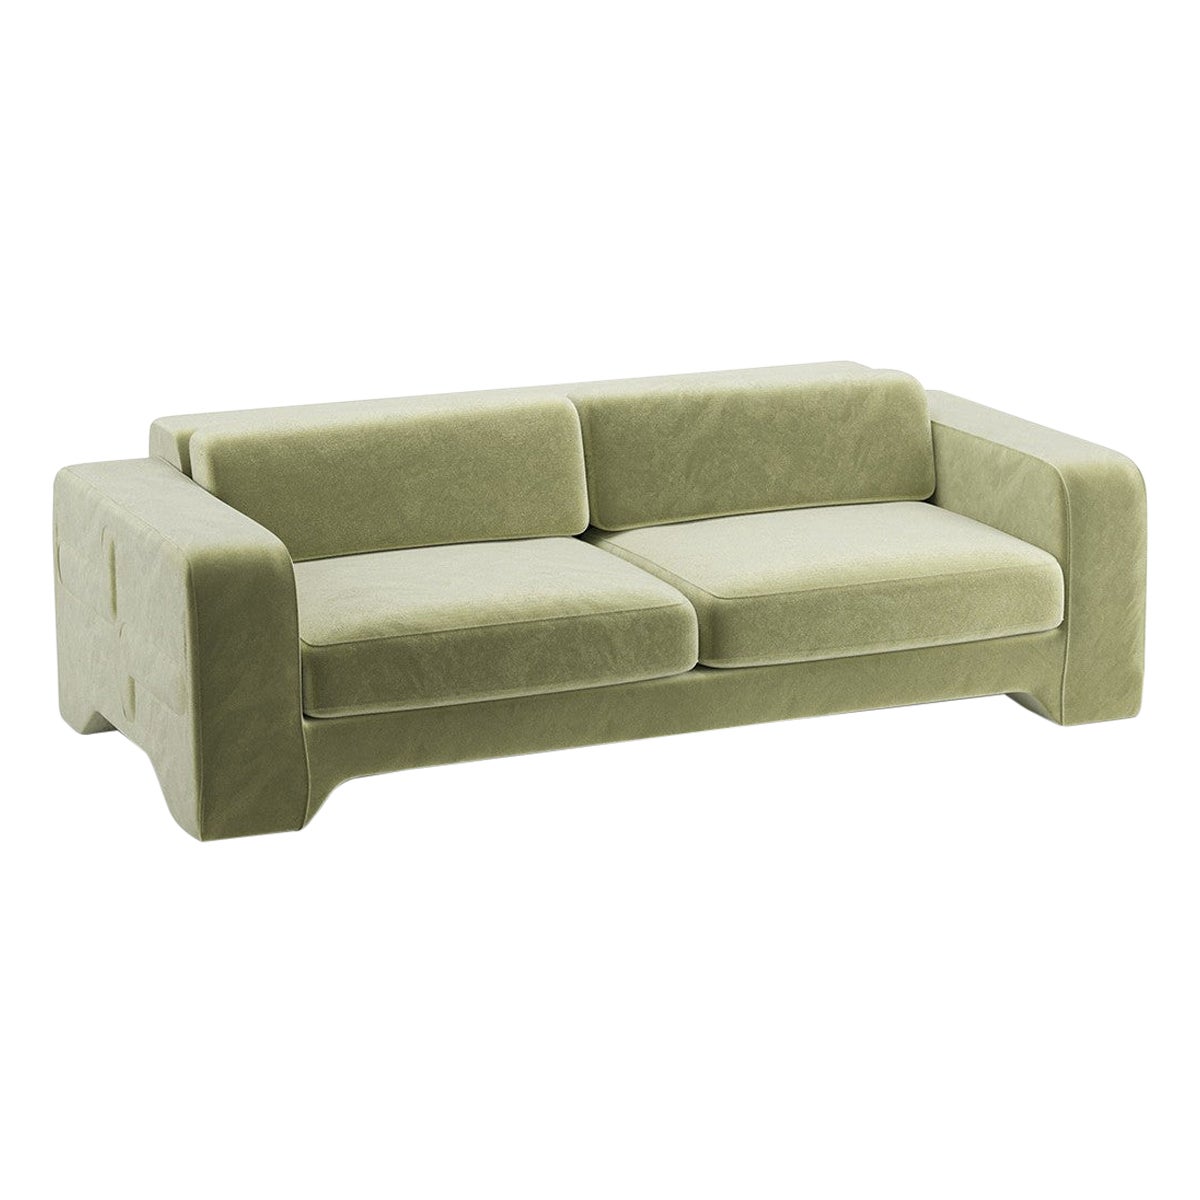 Popus Editions Giovanna 2.5 Seater Sofa in Almond Green Como Velvet Upholstery